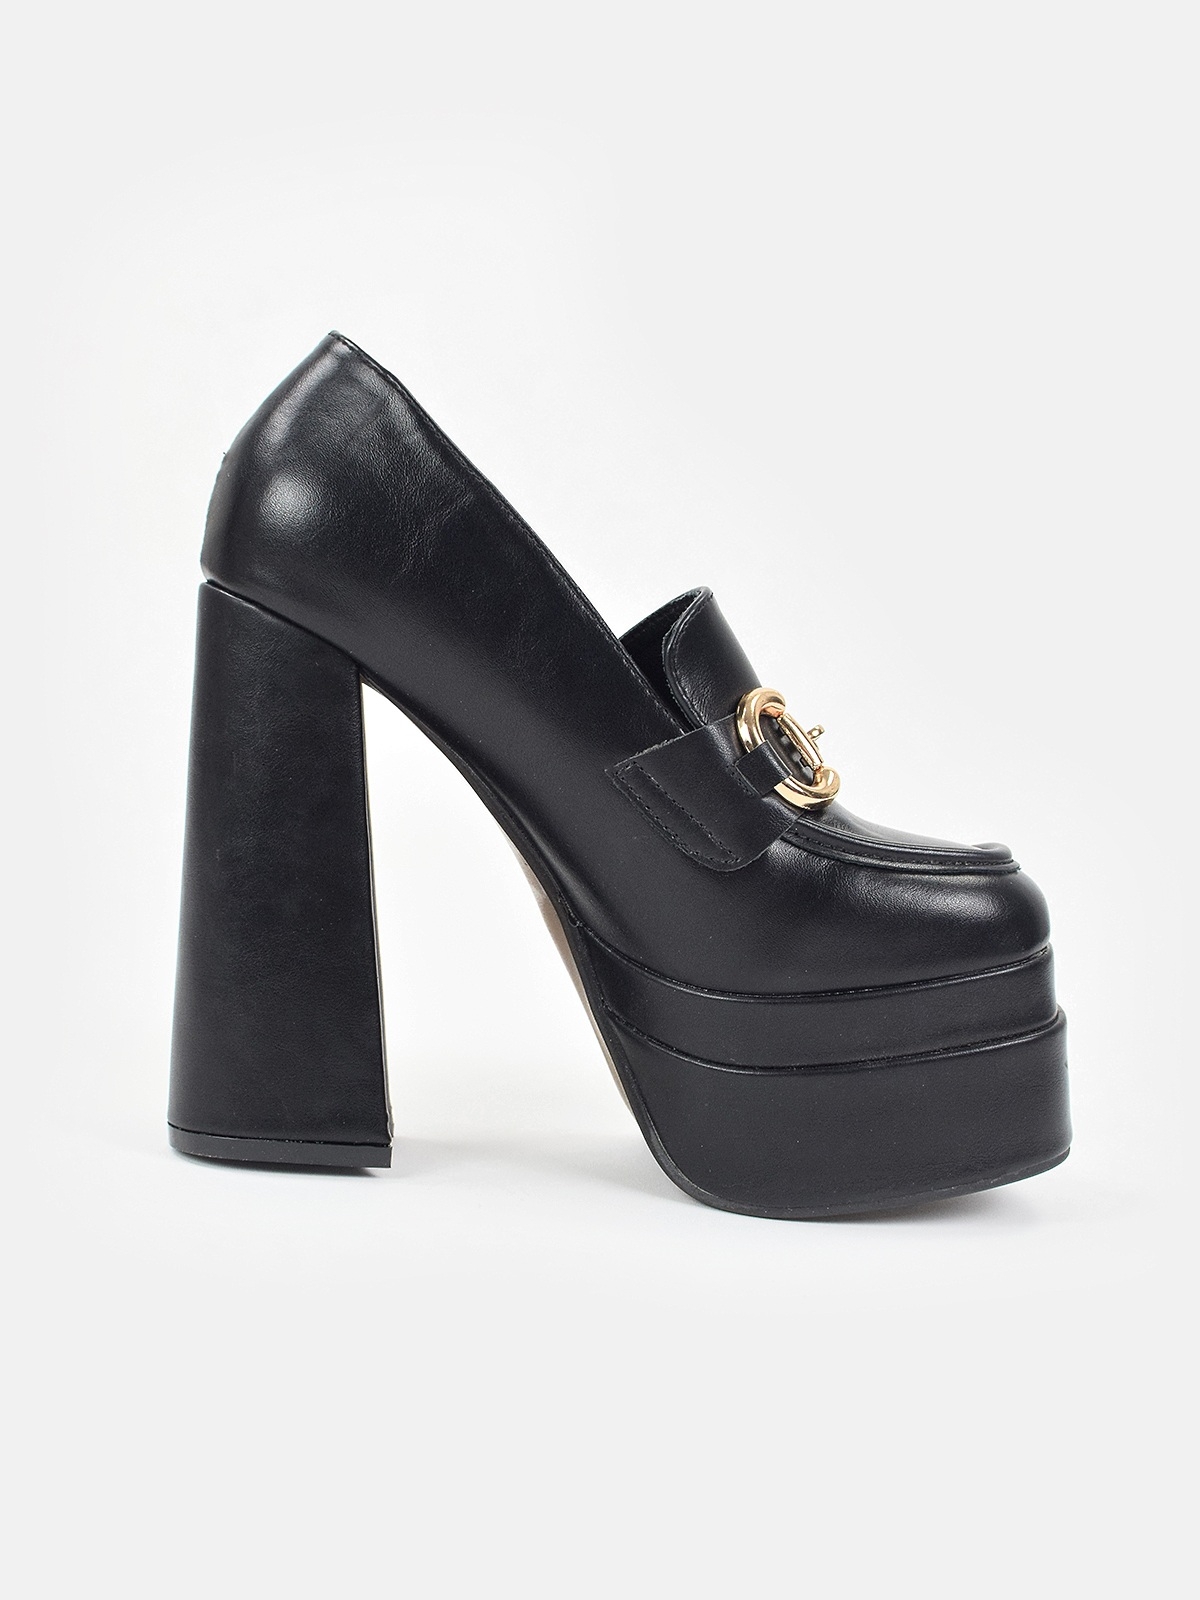 High heeled platform shoes with gold-tone metal trim in black